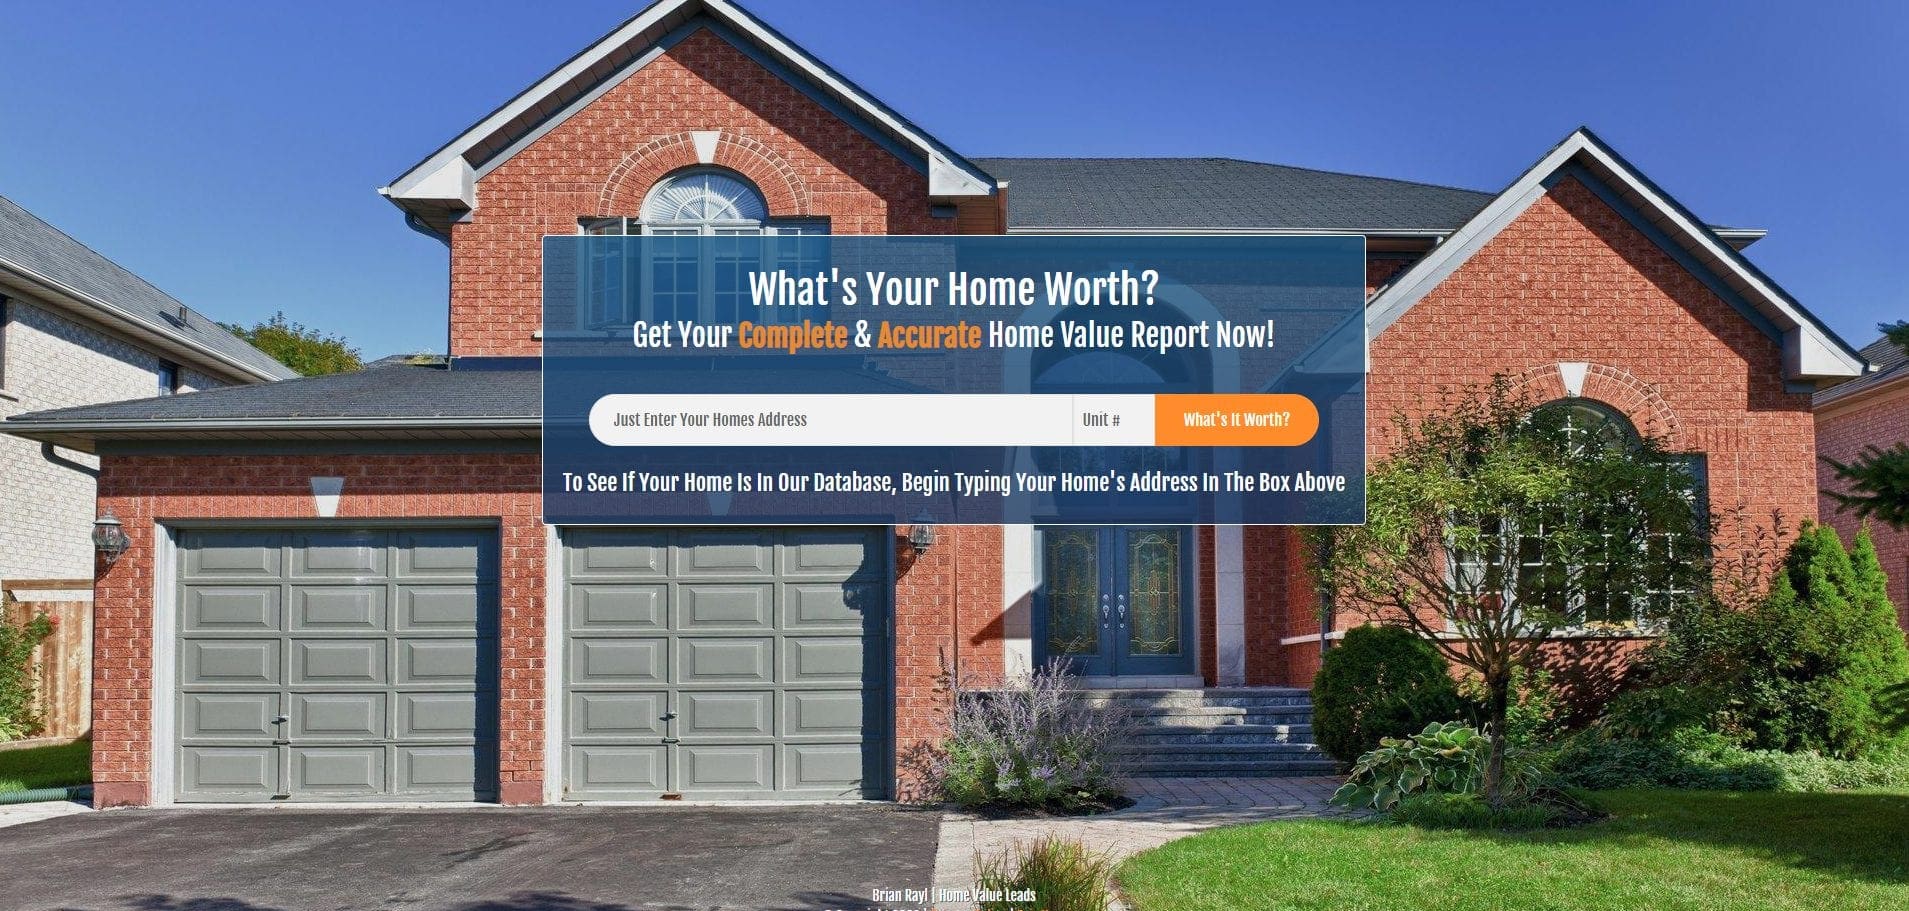 Screenshot of a Home Value Leads real estate landing page